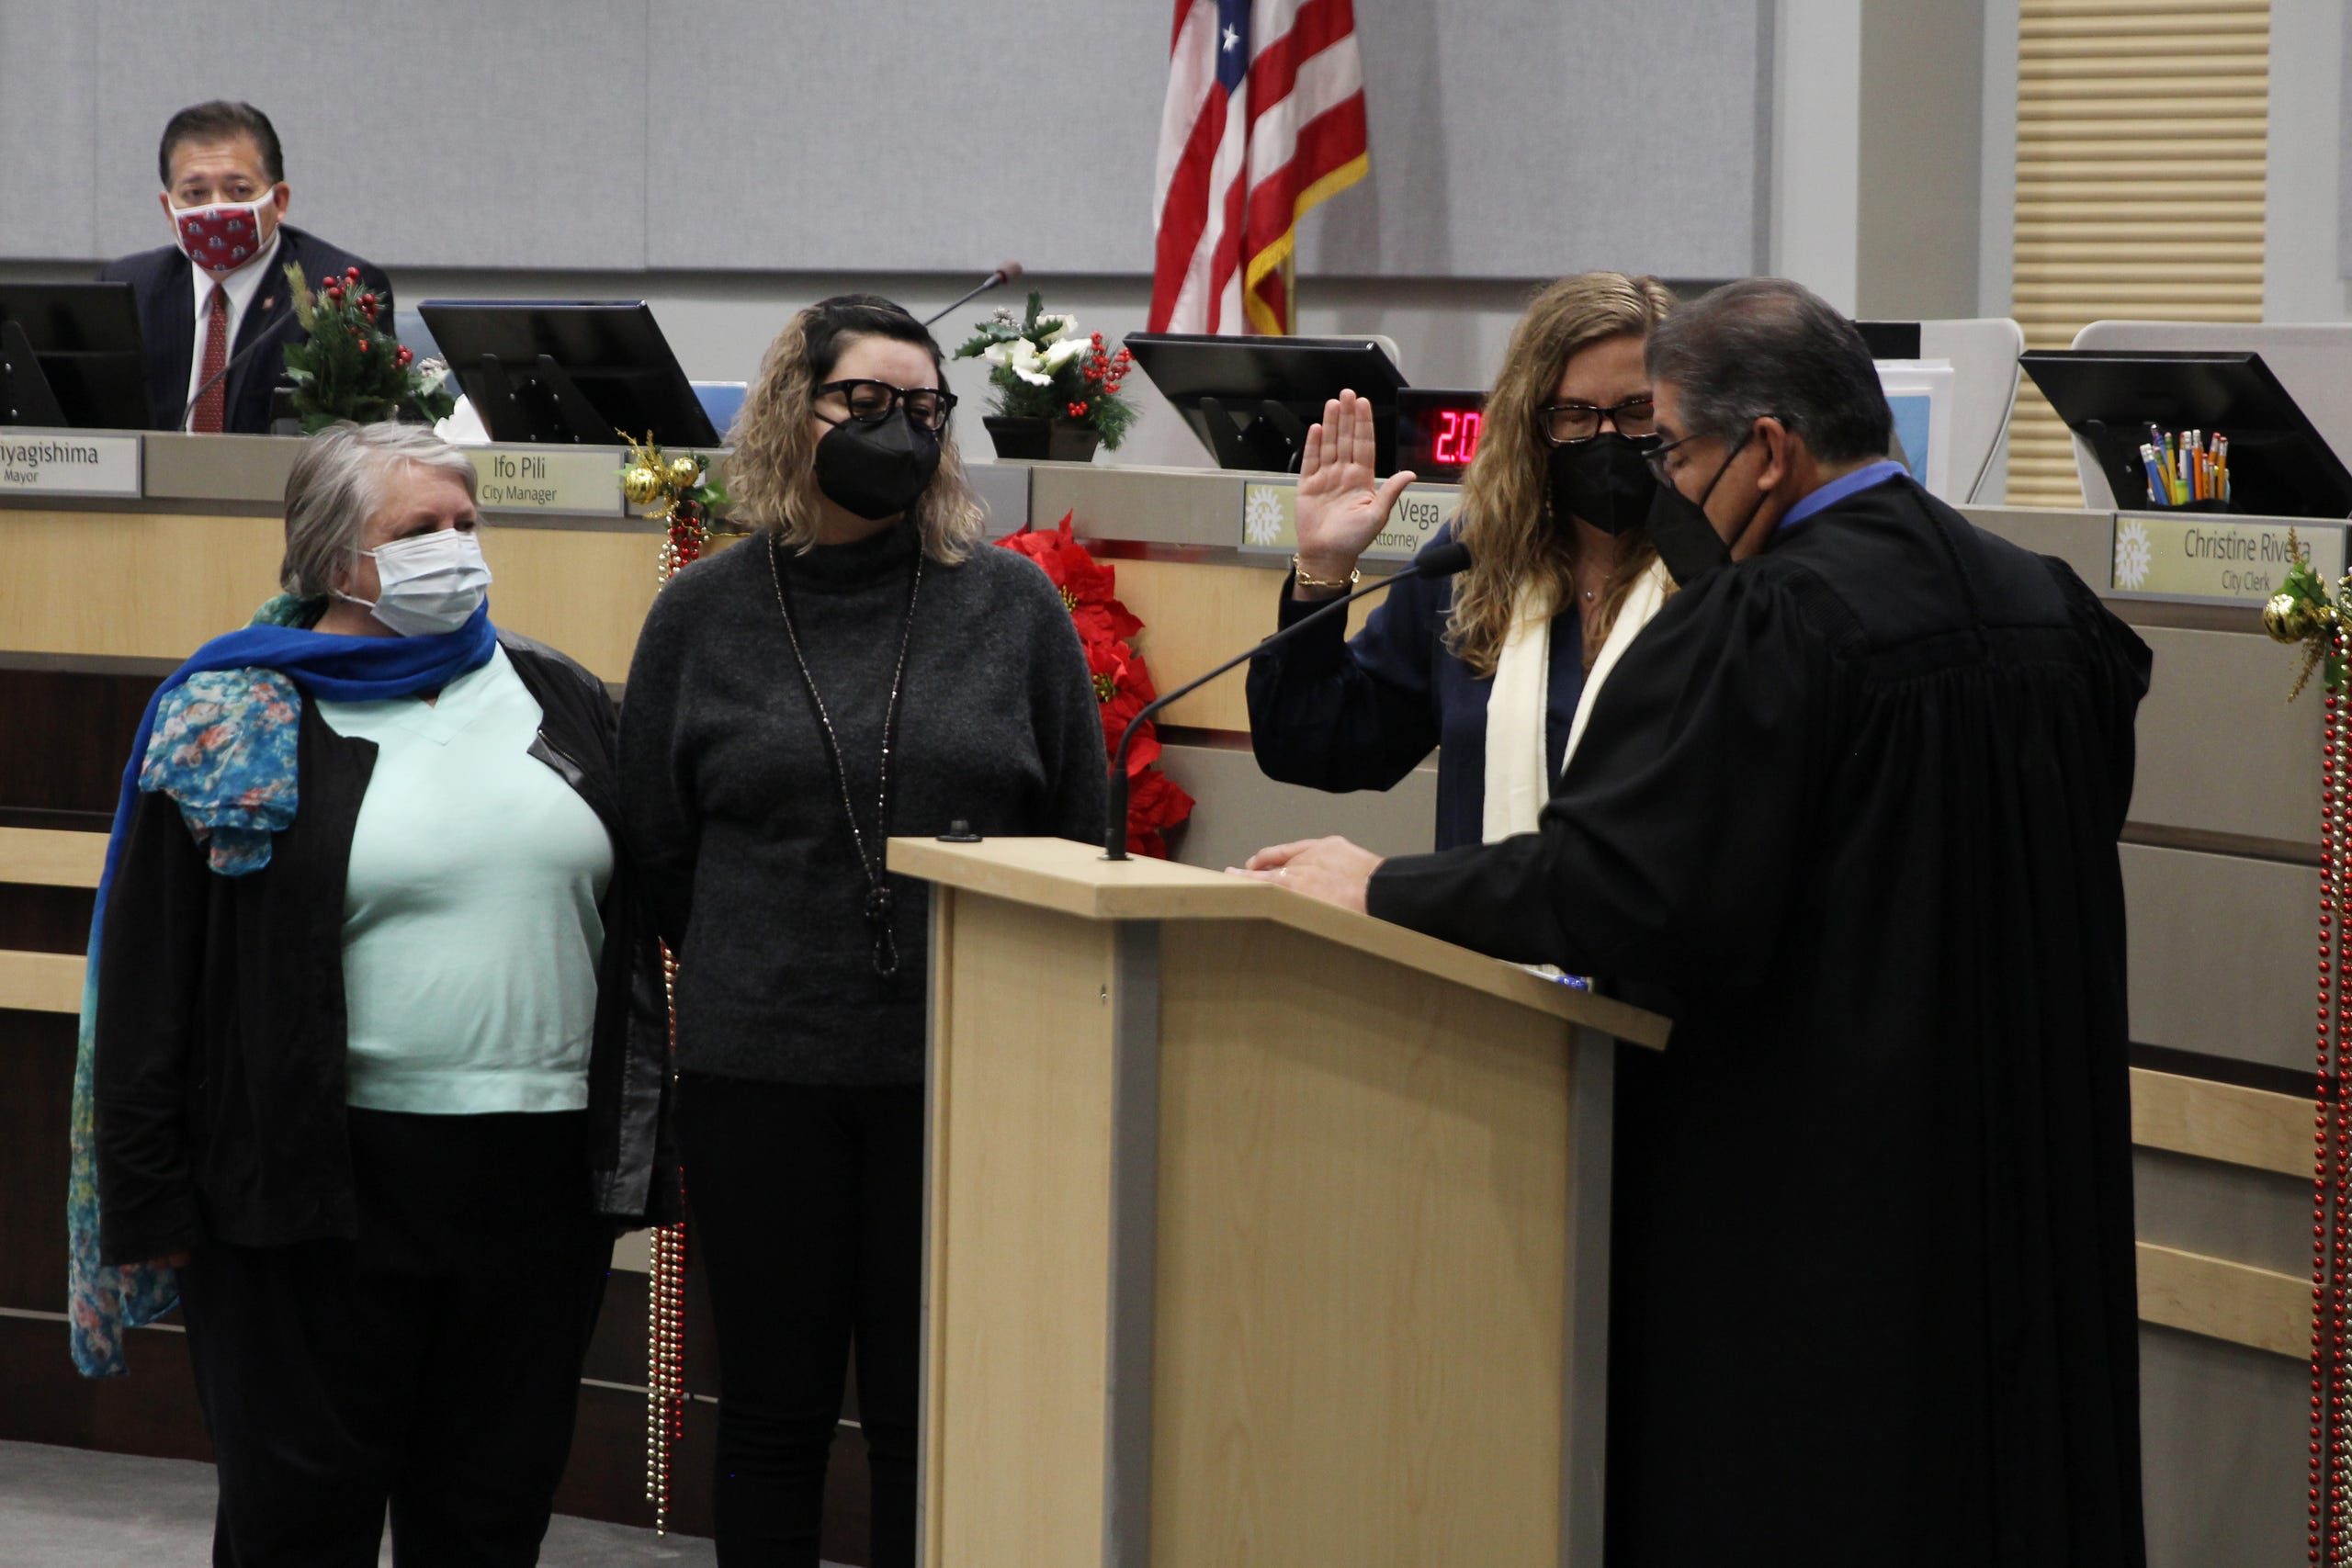 Las Cruces City Councilor Becky Corran, district 5, is sworn in by District Court Judge Conrad Perea at Las Cruces City Hall on Monday, Dec. 20, 2021.